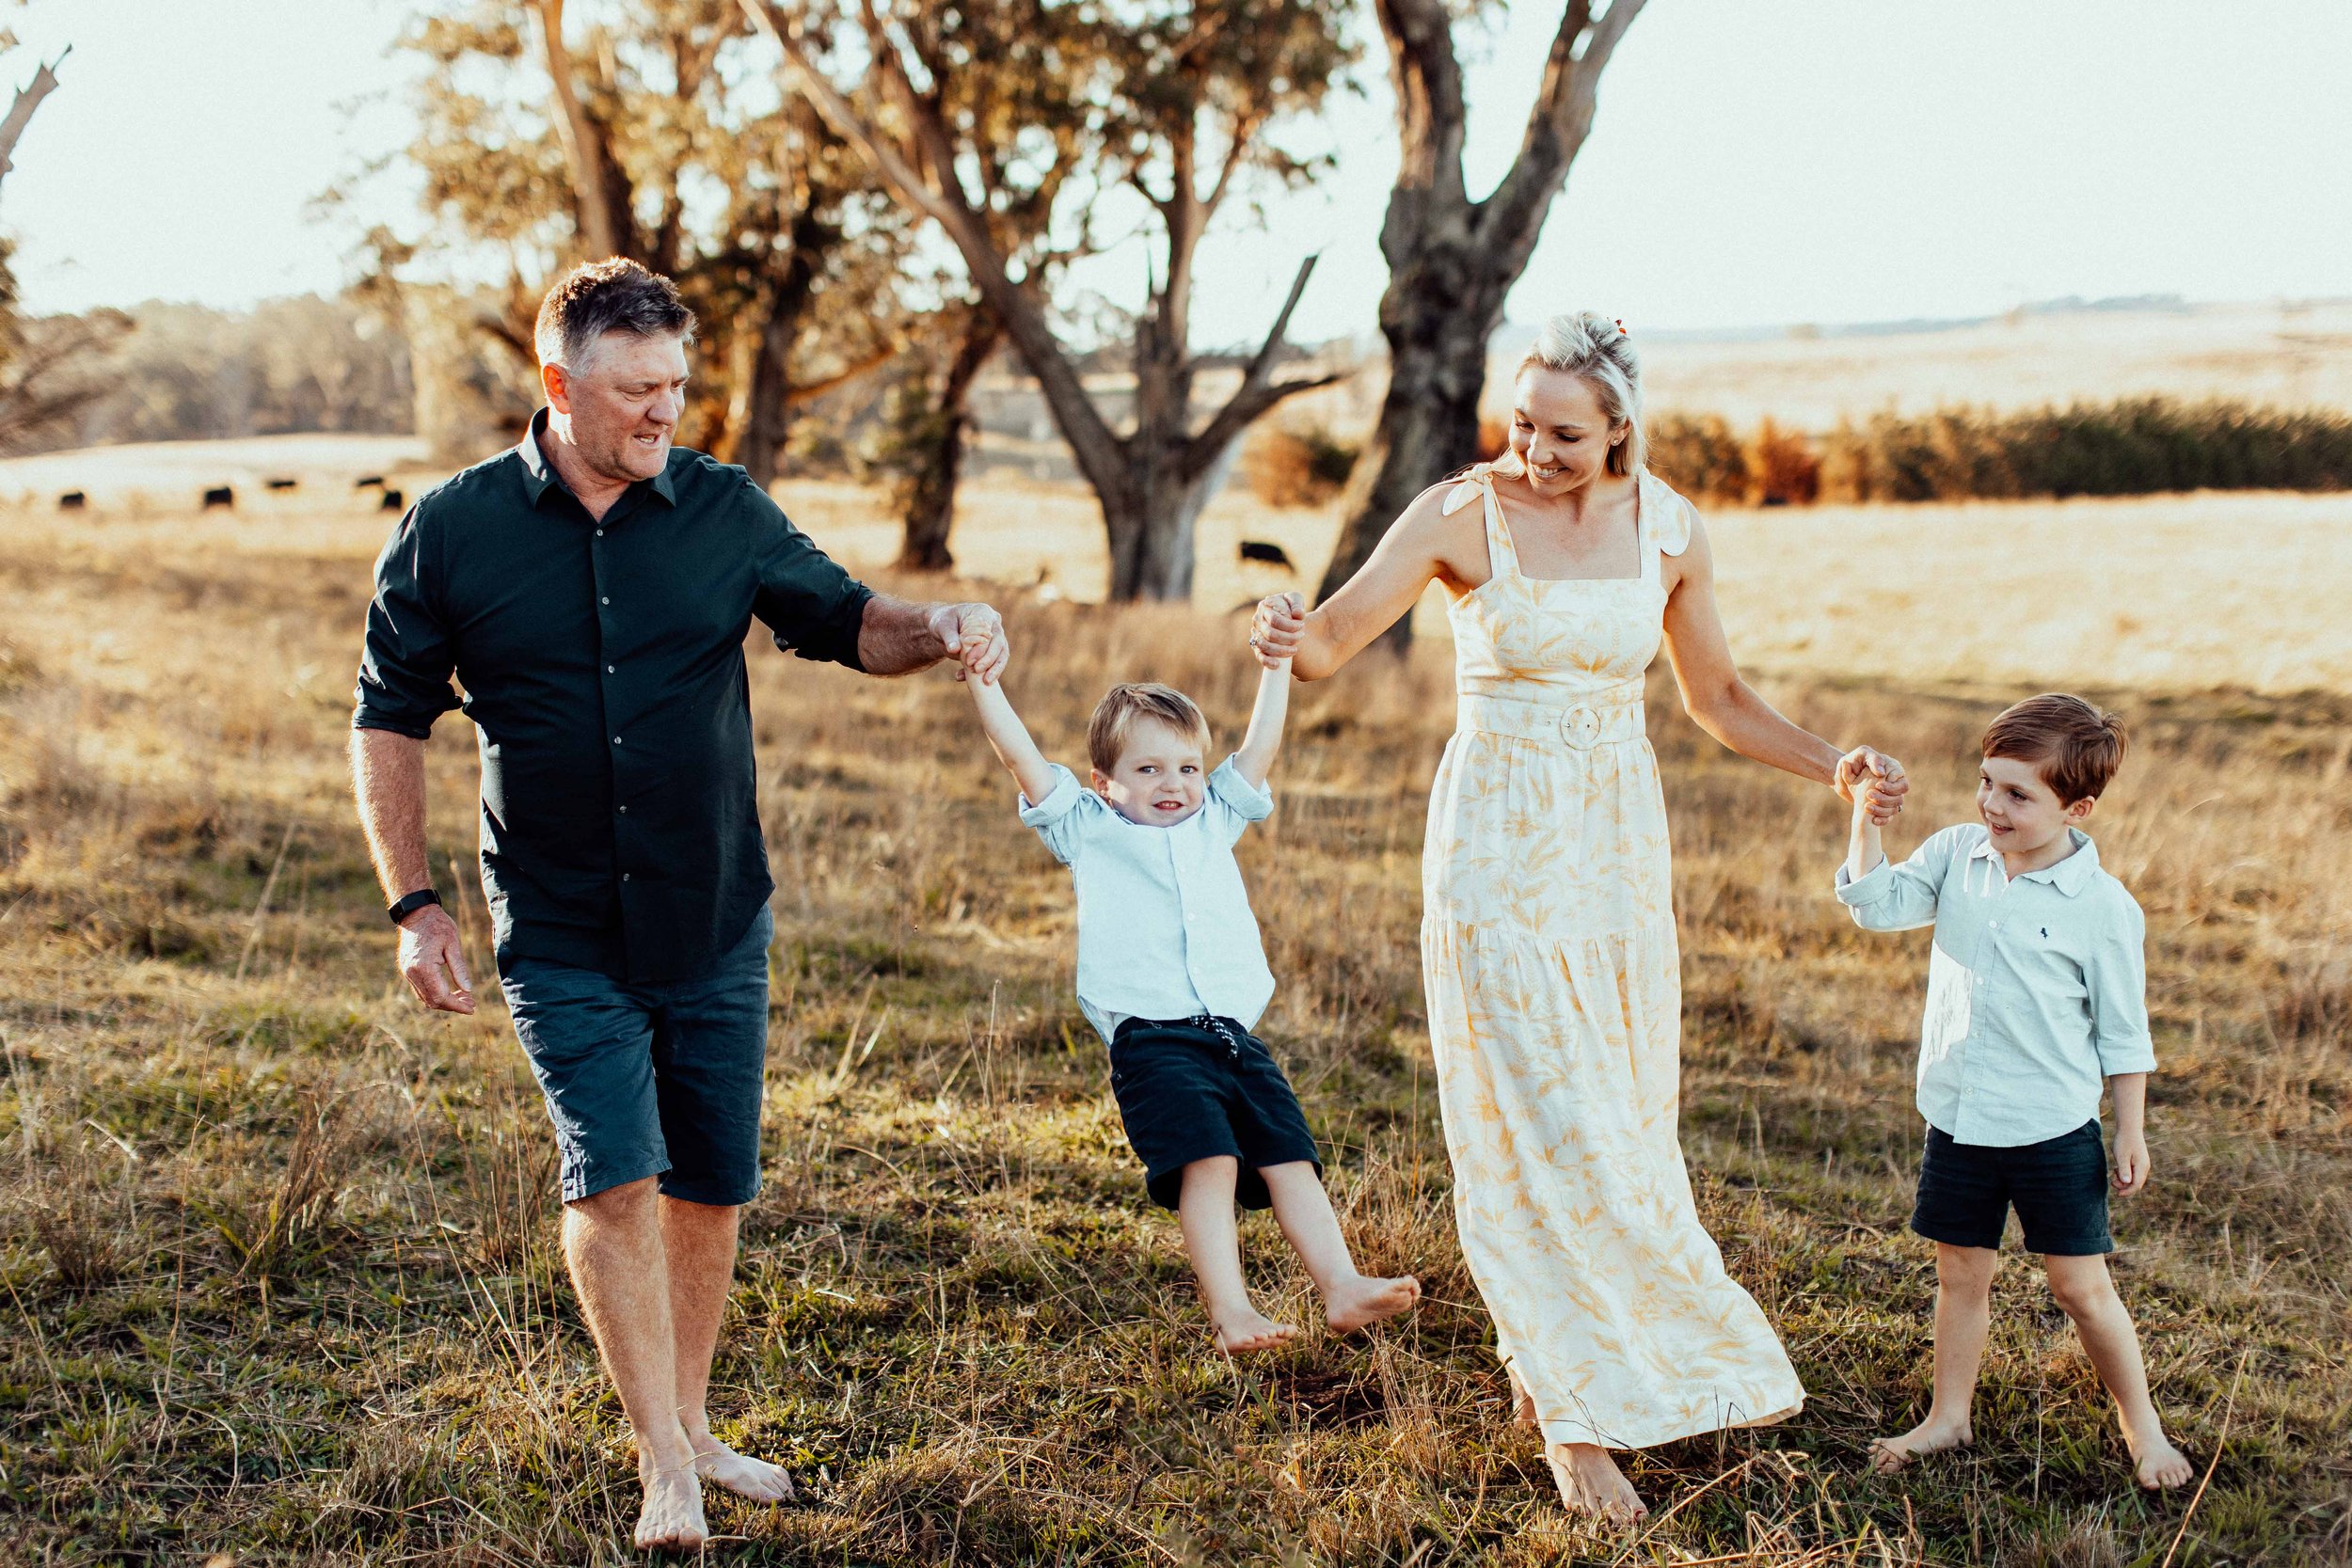 durney-family-exeter-southern-highlands-bowral-inhome-family-lifestyle-wollondilly-camden-macarthur-sydney-photography-www.emilyobrienphotography.net-39.jpg